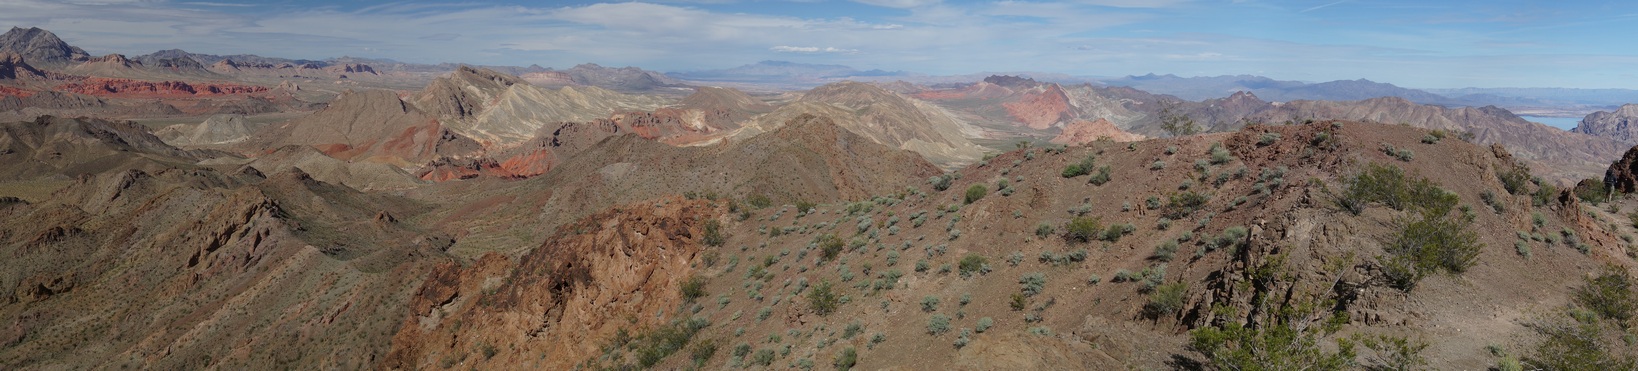 Pinto Valley Wilderness Viewed From Hamblin Mountain